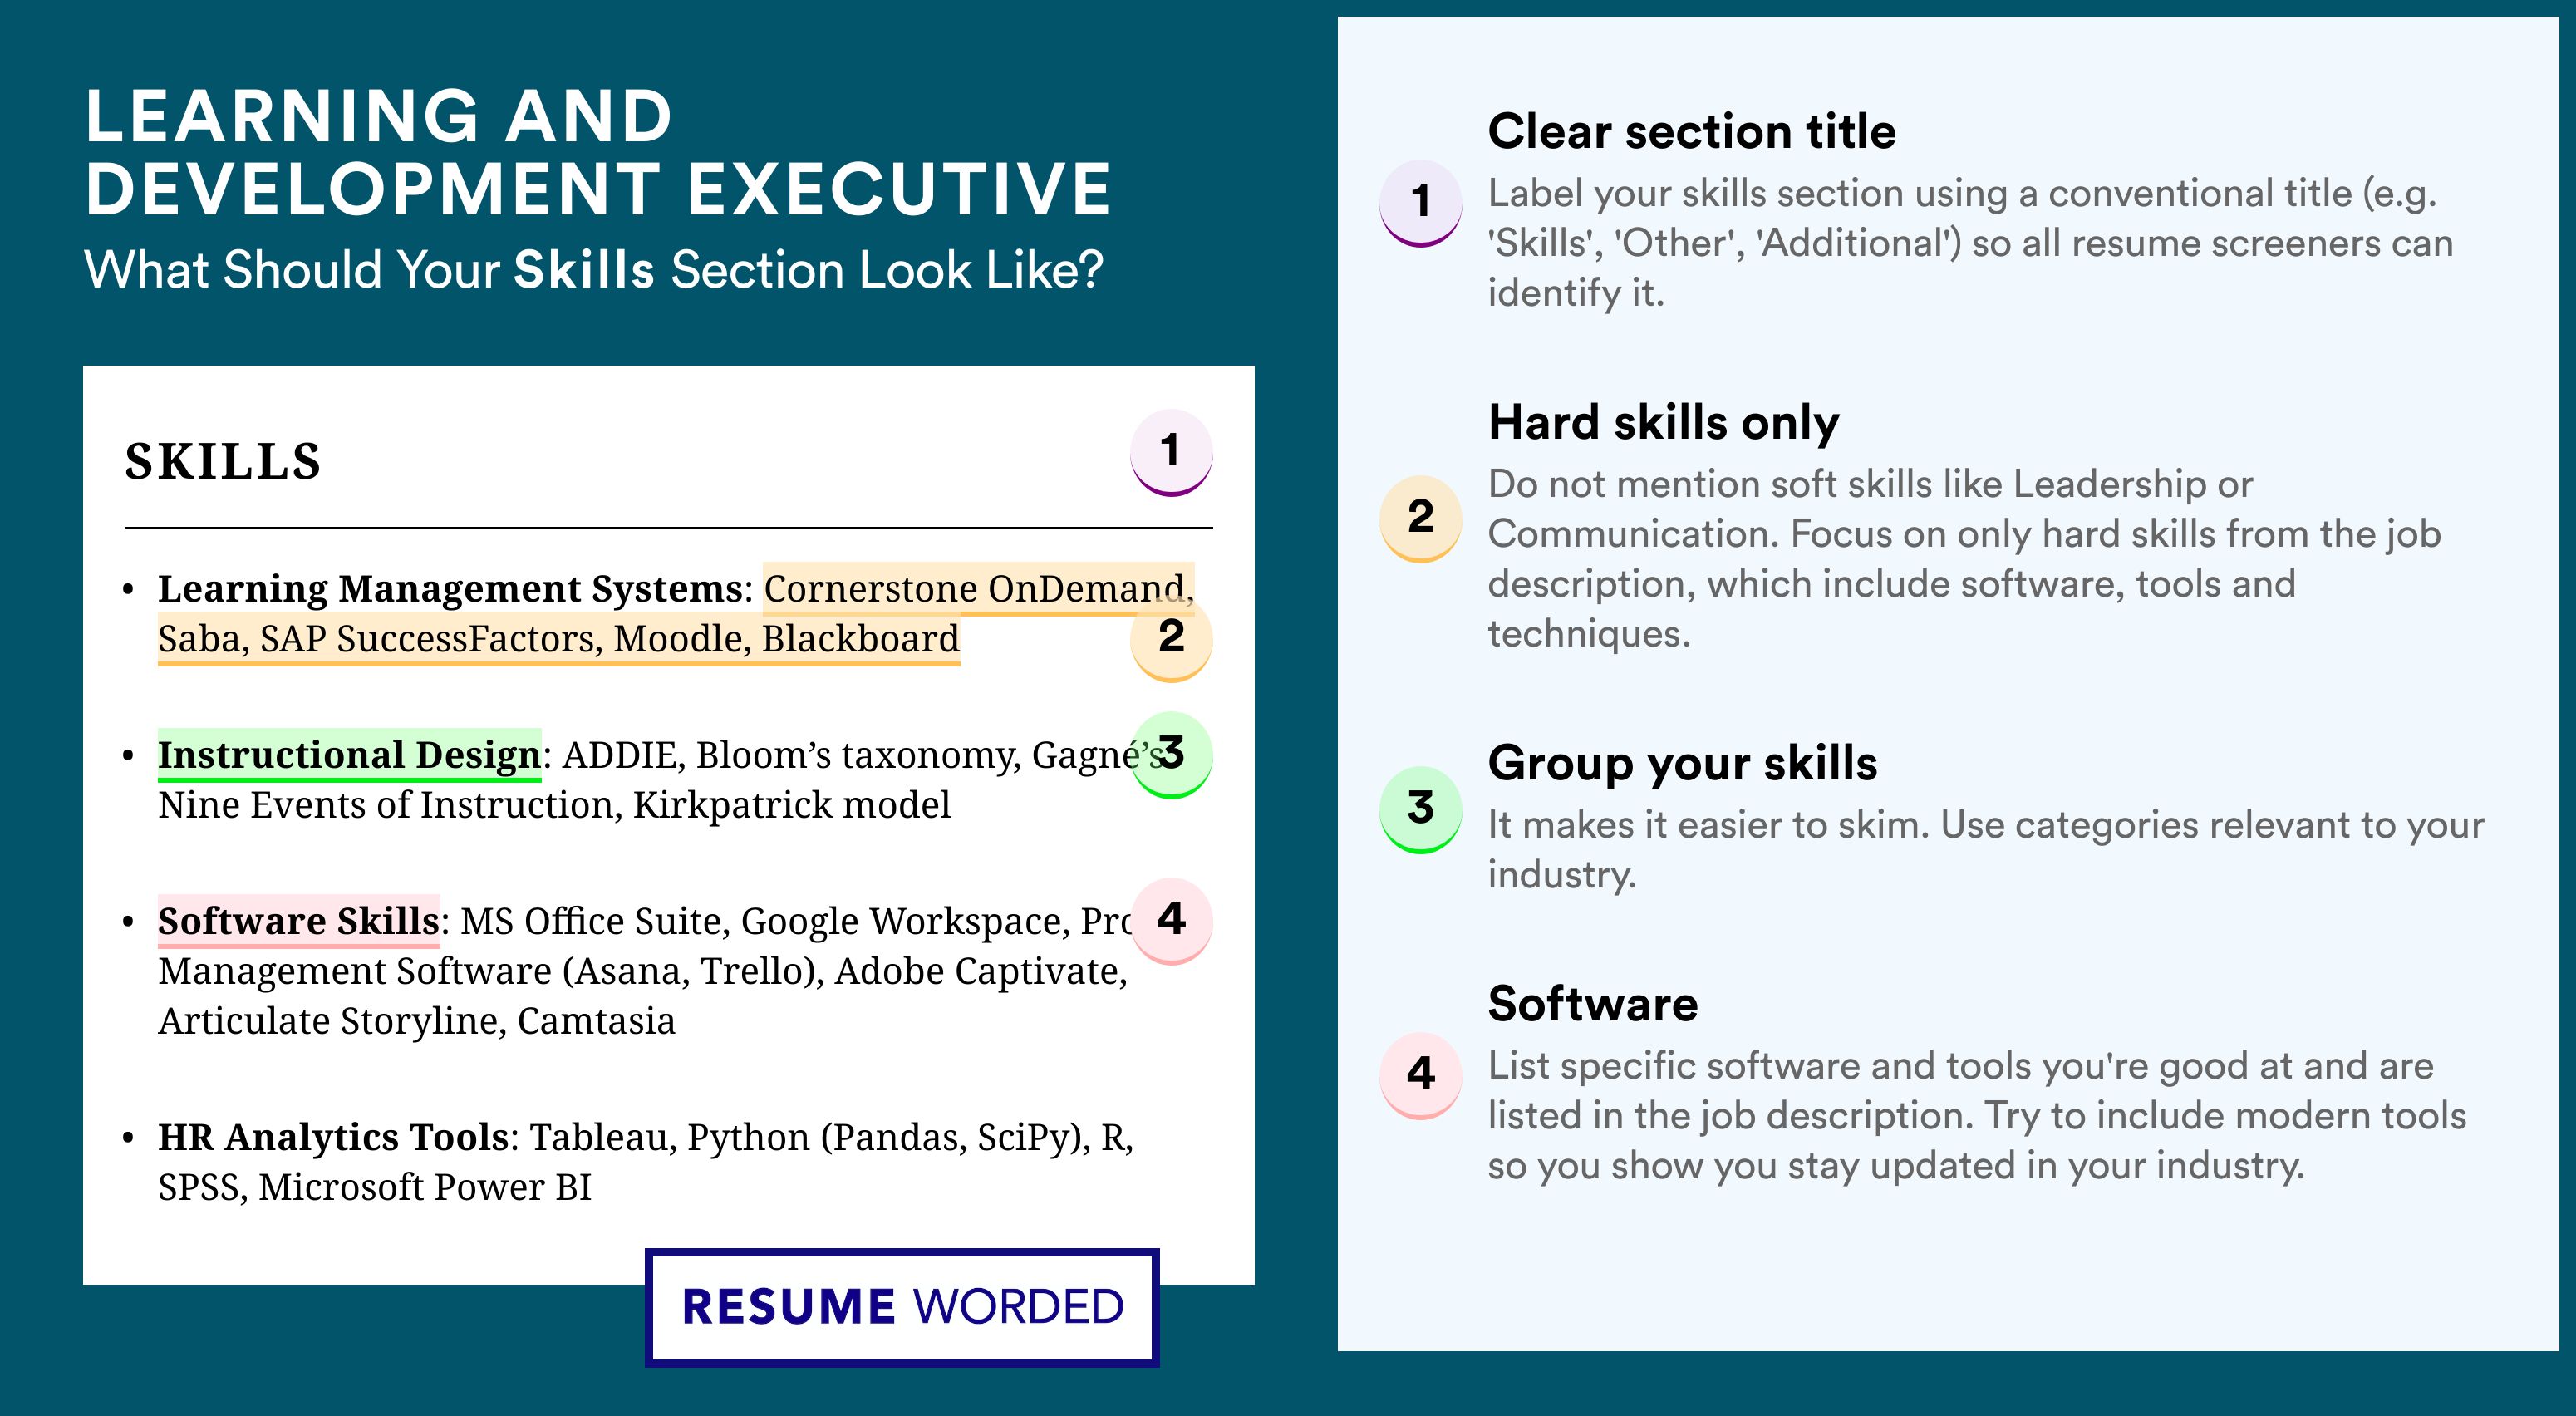 How To Write Your Skills Section - Learning and Development Executive Roles